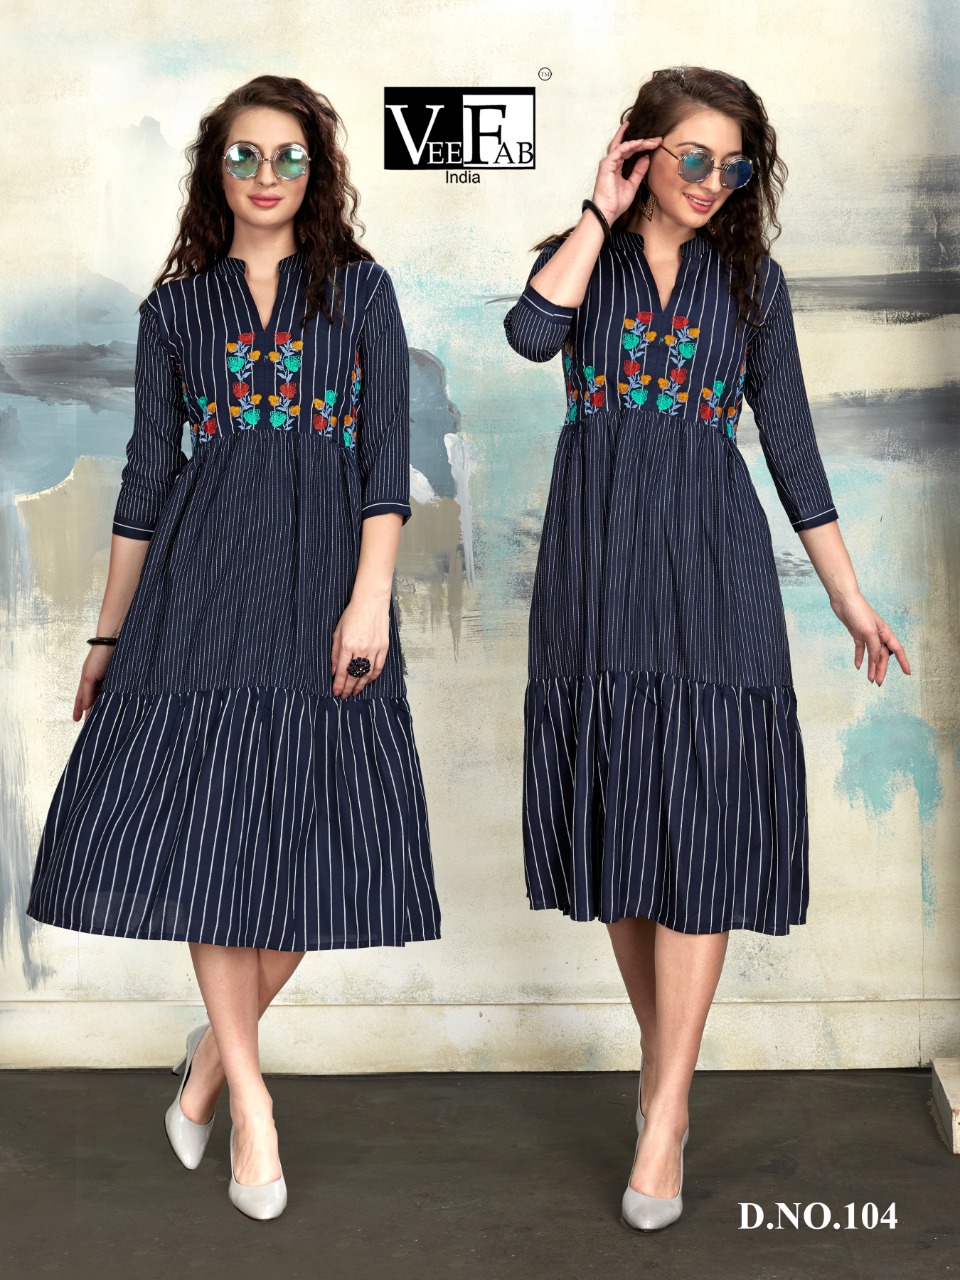 Vee Fab spring vol 1 gorgeous stunning Style rayon fabric with EMBROIDERY modern Kurties